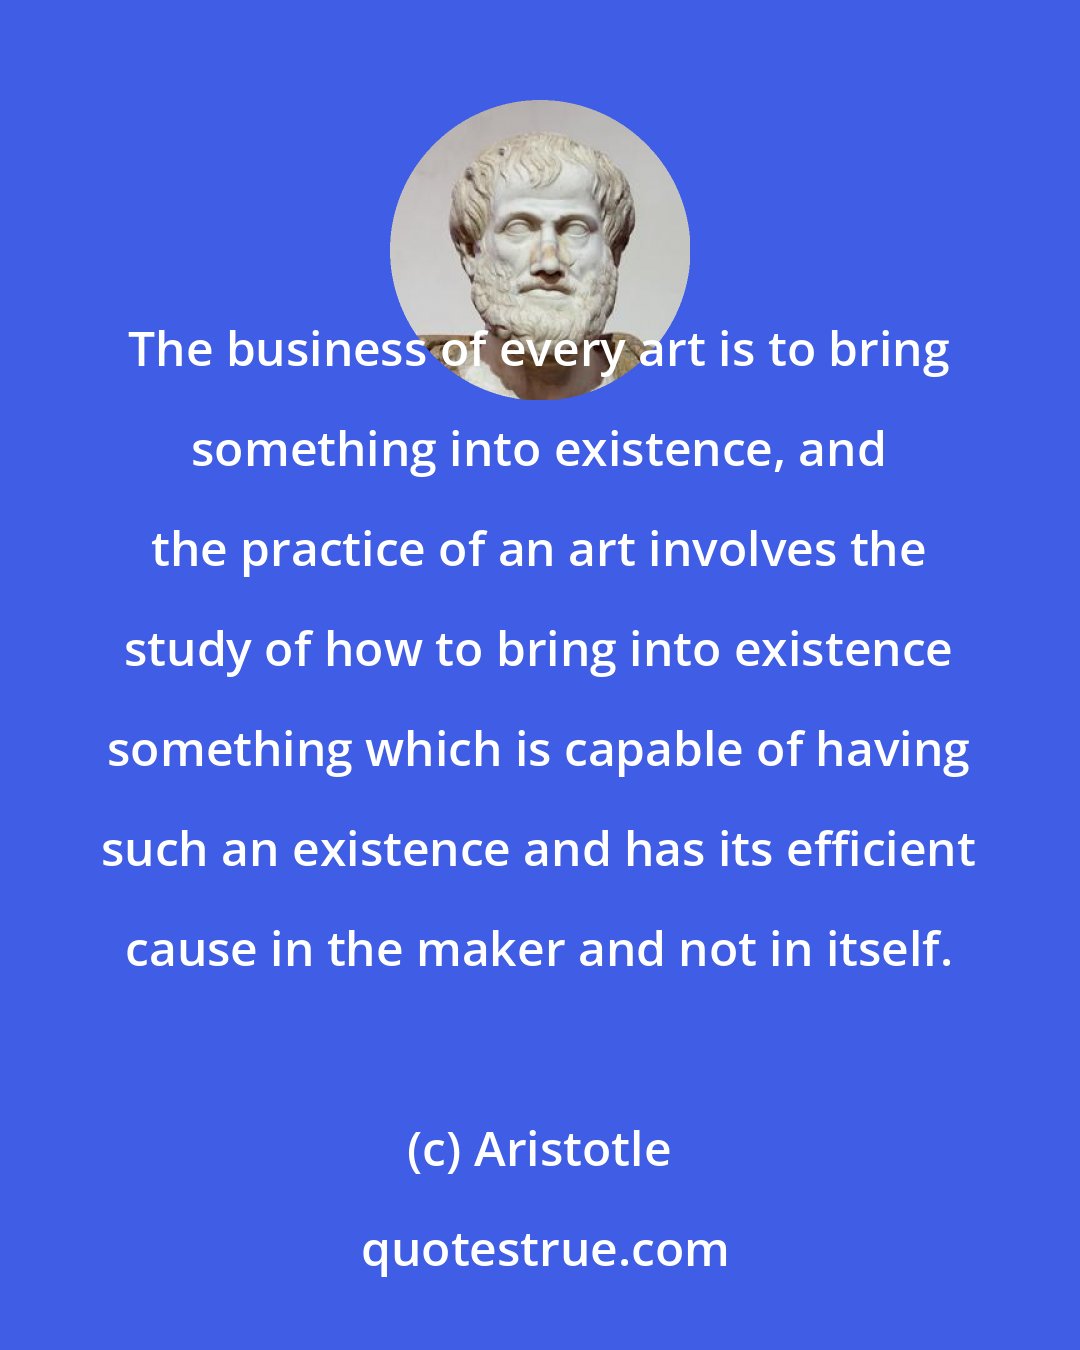 Aristotle: The business of every art is to bring something into existence, and the practice of an art involves the study of how to bring into existence something which is capable of having such an existence and has its efficient cause in the maker and not in itself.